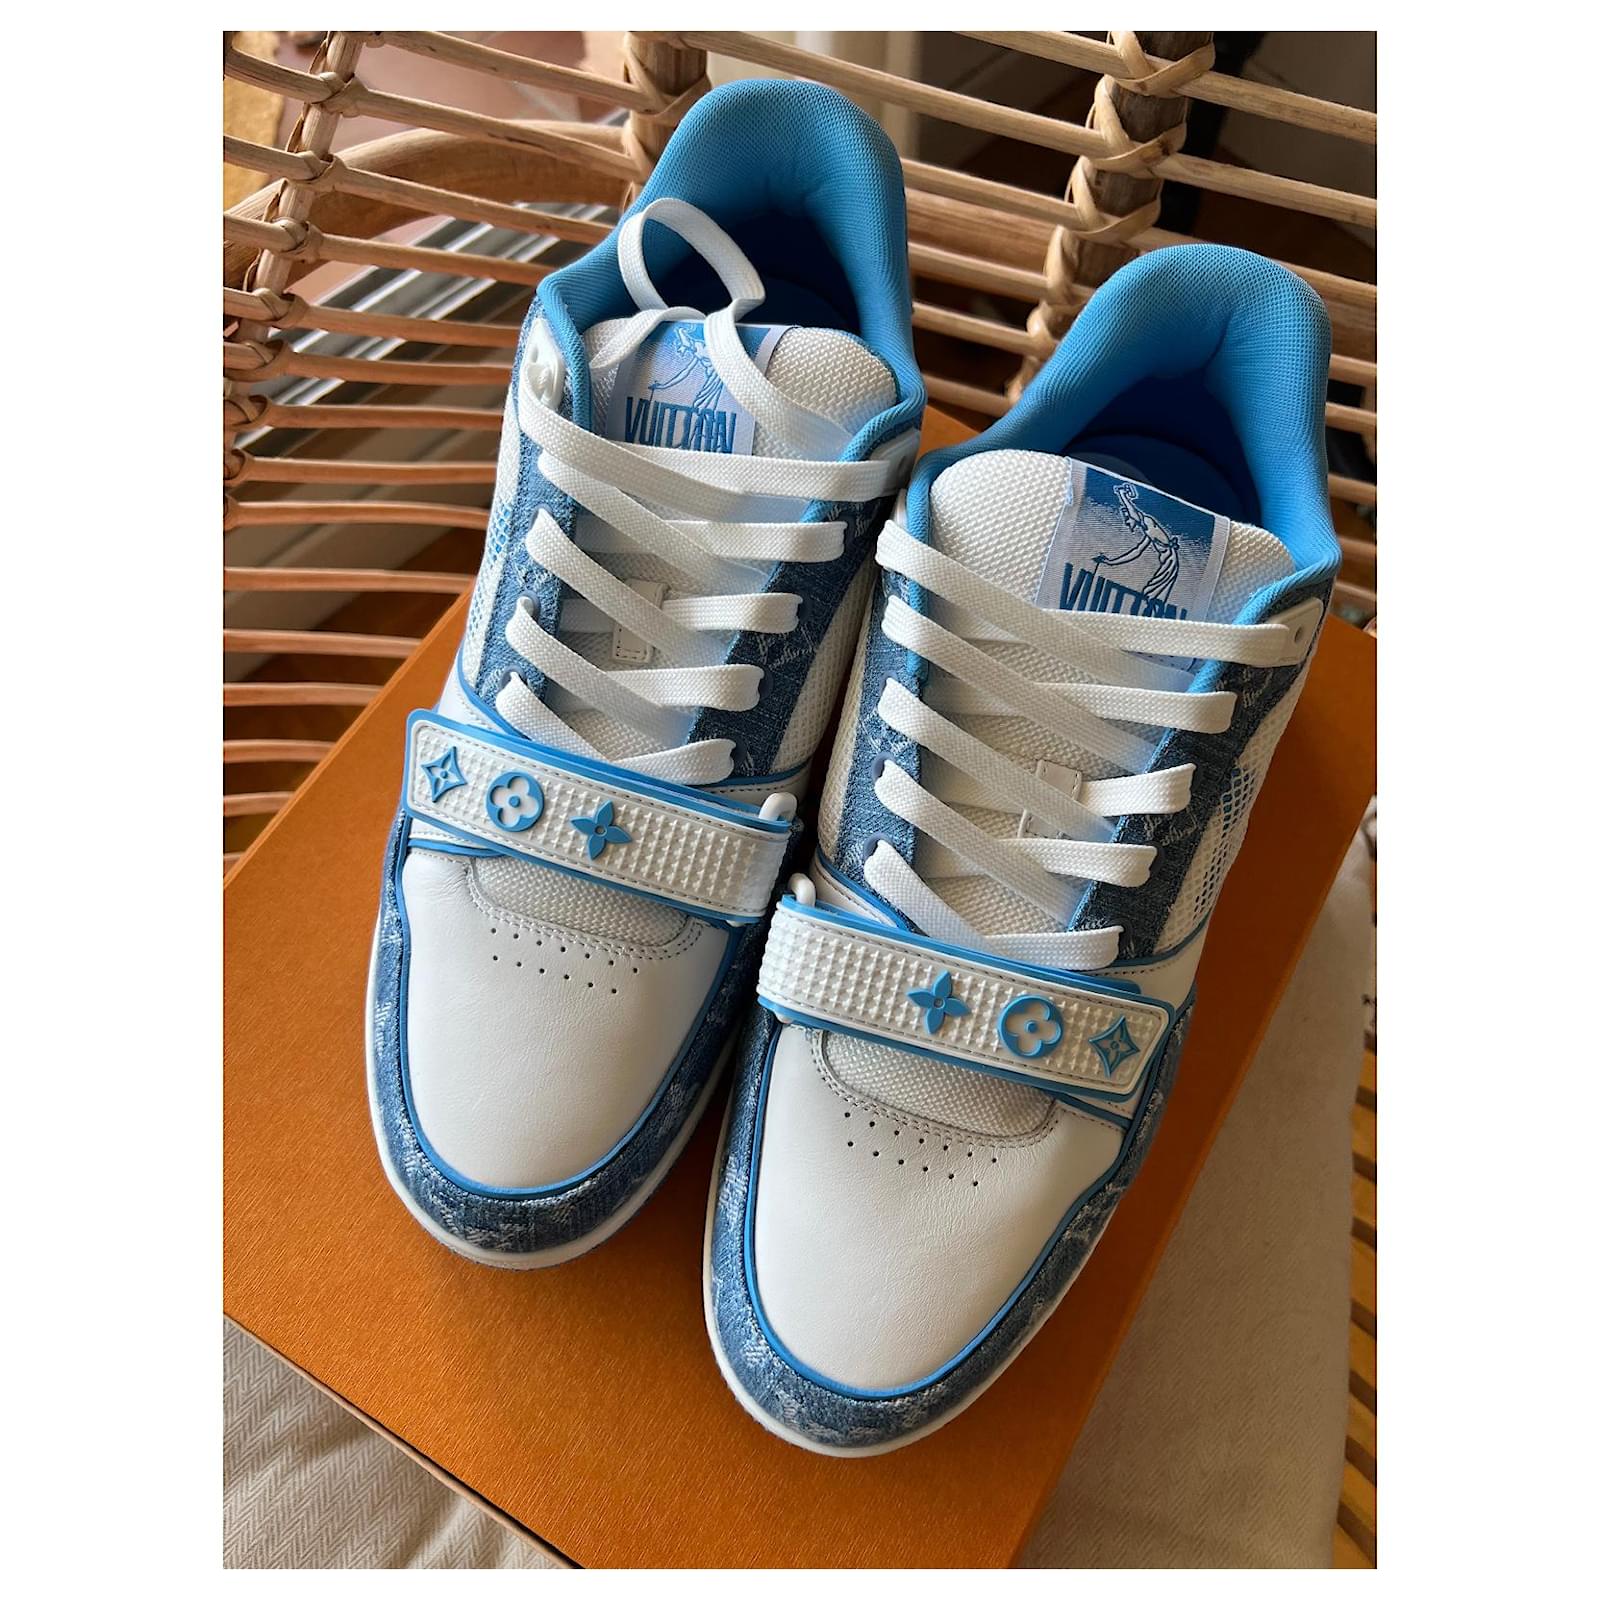 Louis Vuitton designer sneakers shoes for Sale in Medley, FL - OfferUp